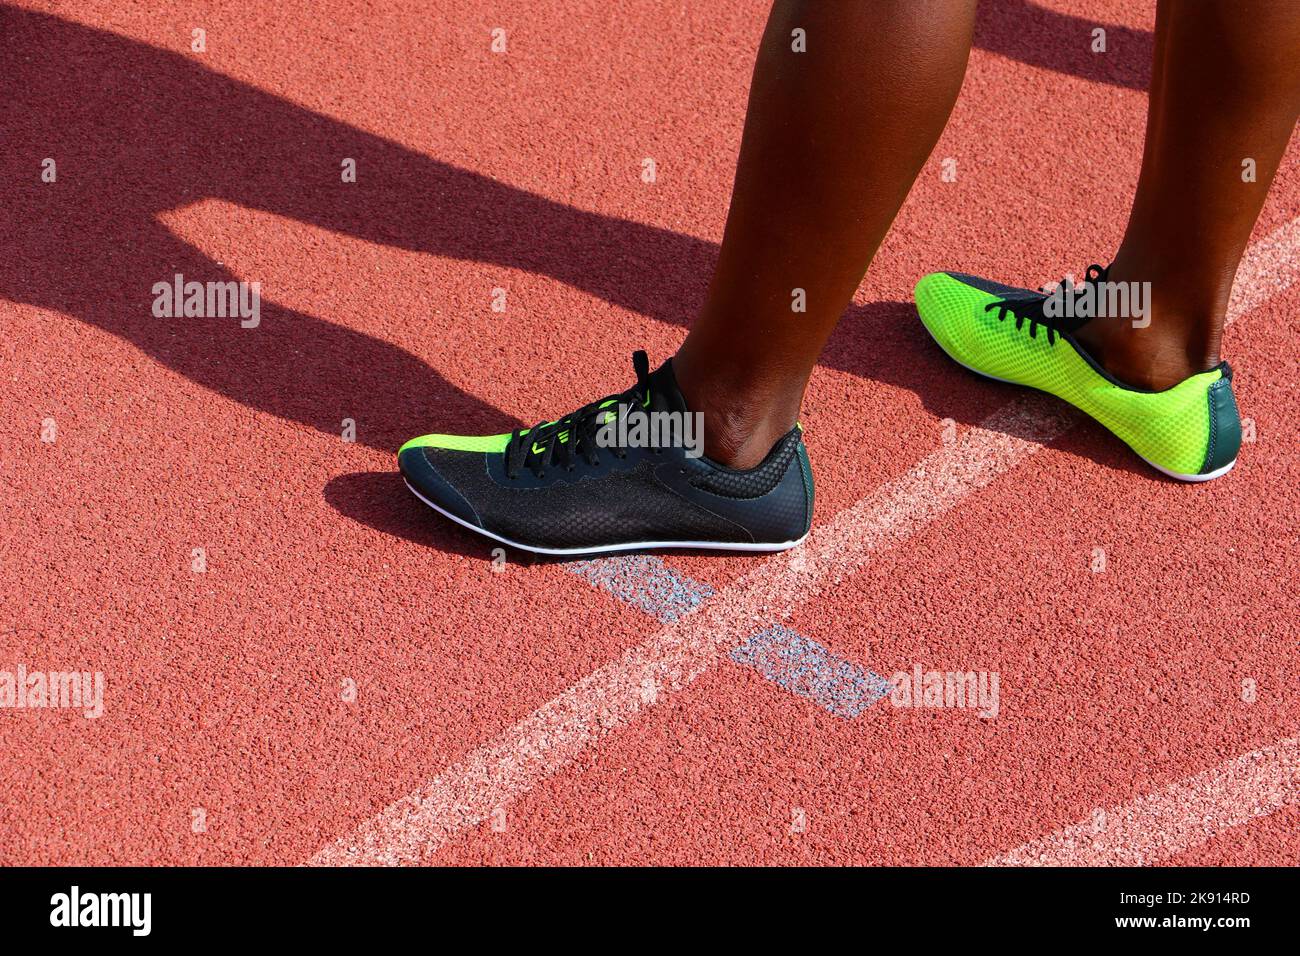 Sprinters feet wearing runners shoes standing on an athletics track Stock Photo